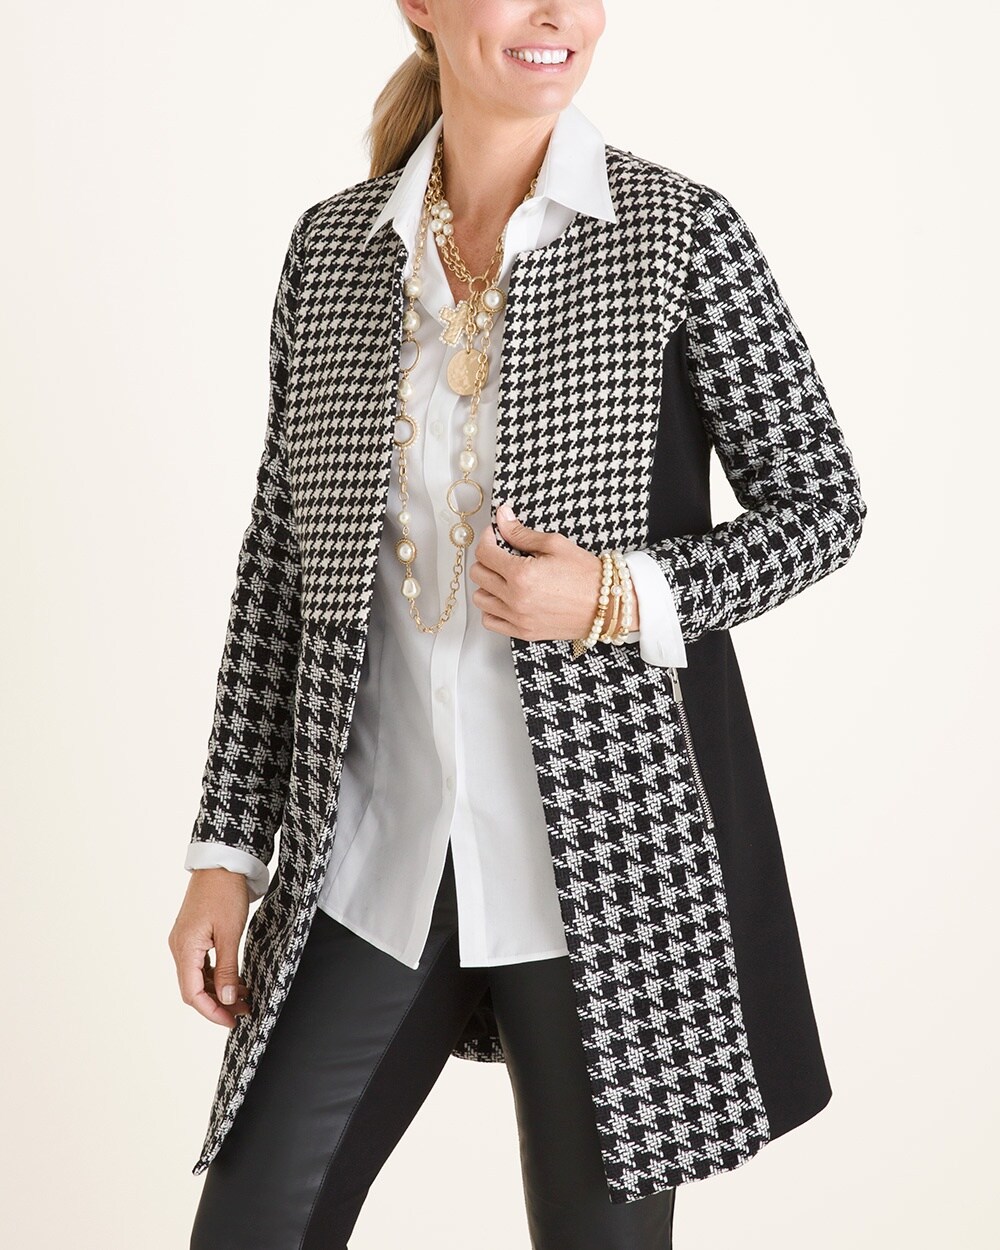 Patched Houndstooth Jacket